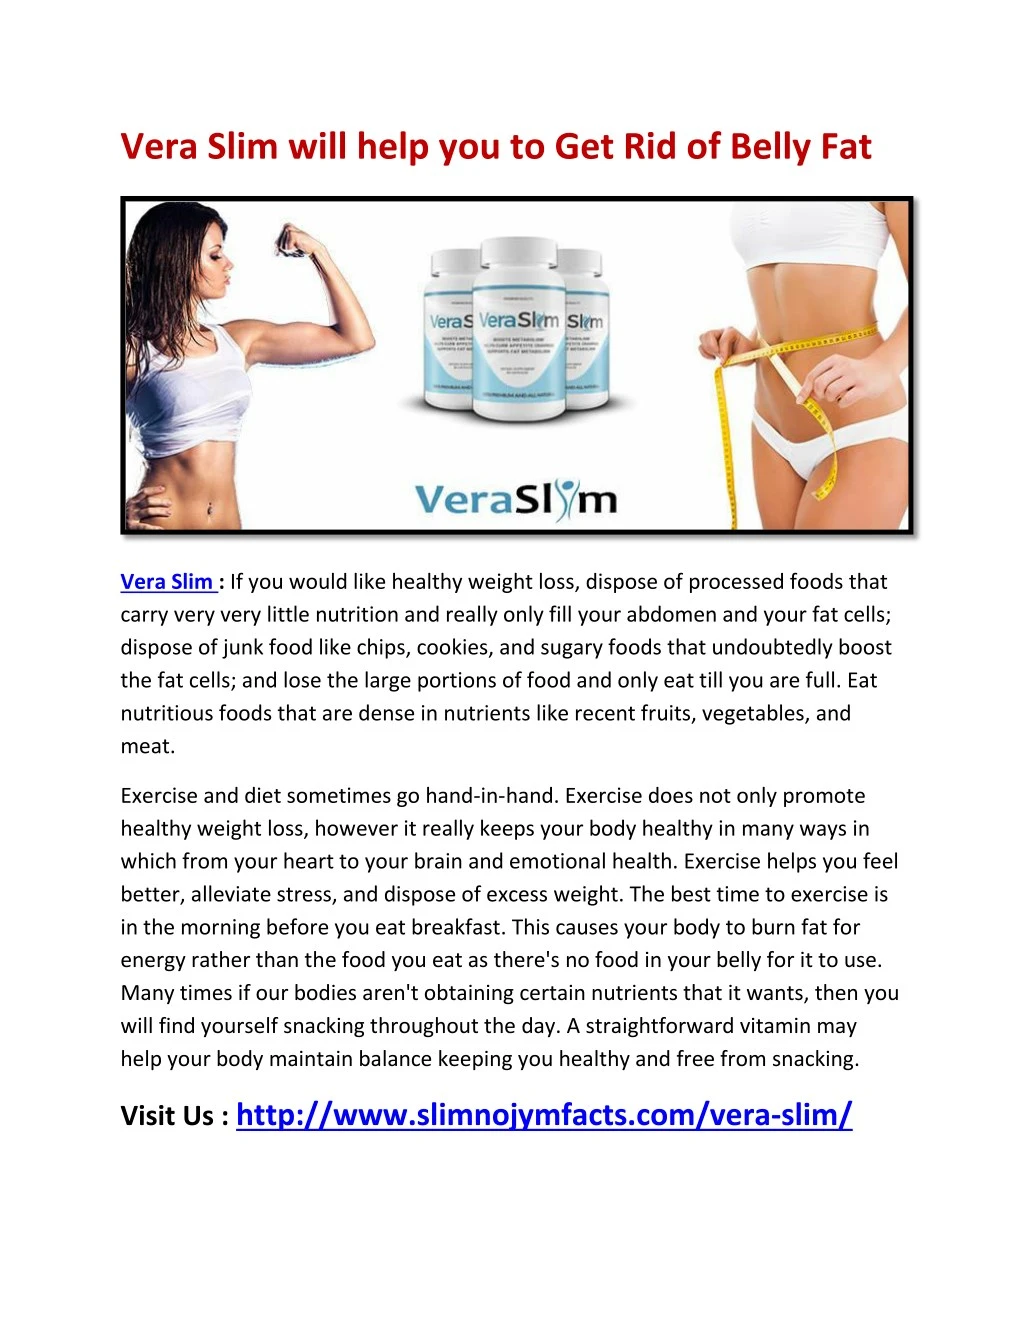 vera slim will help you to get rid of belly fat